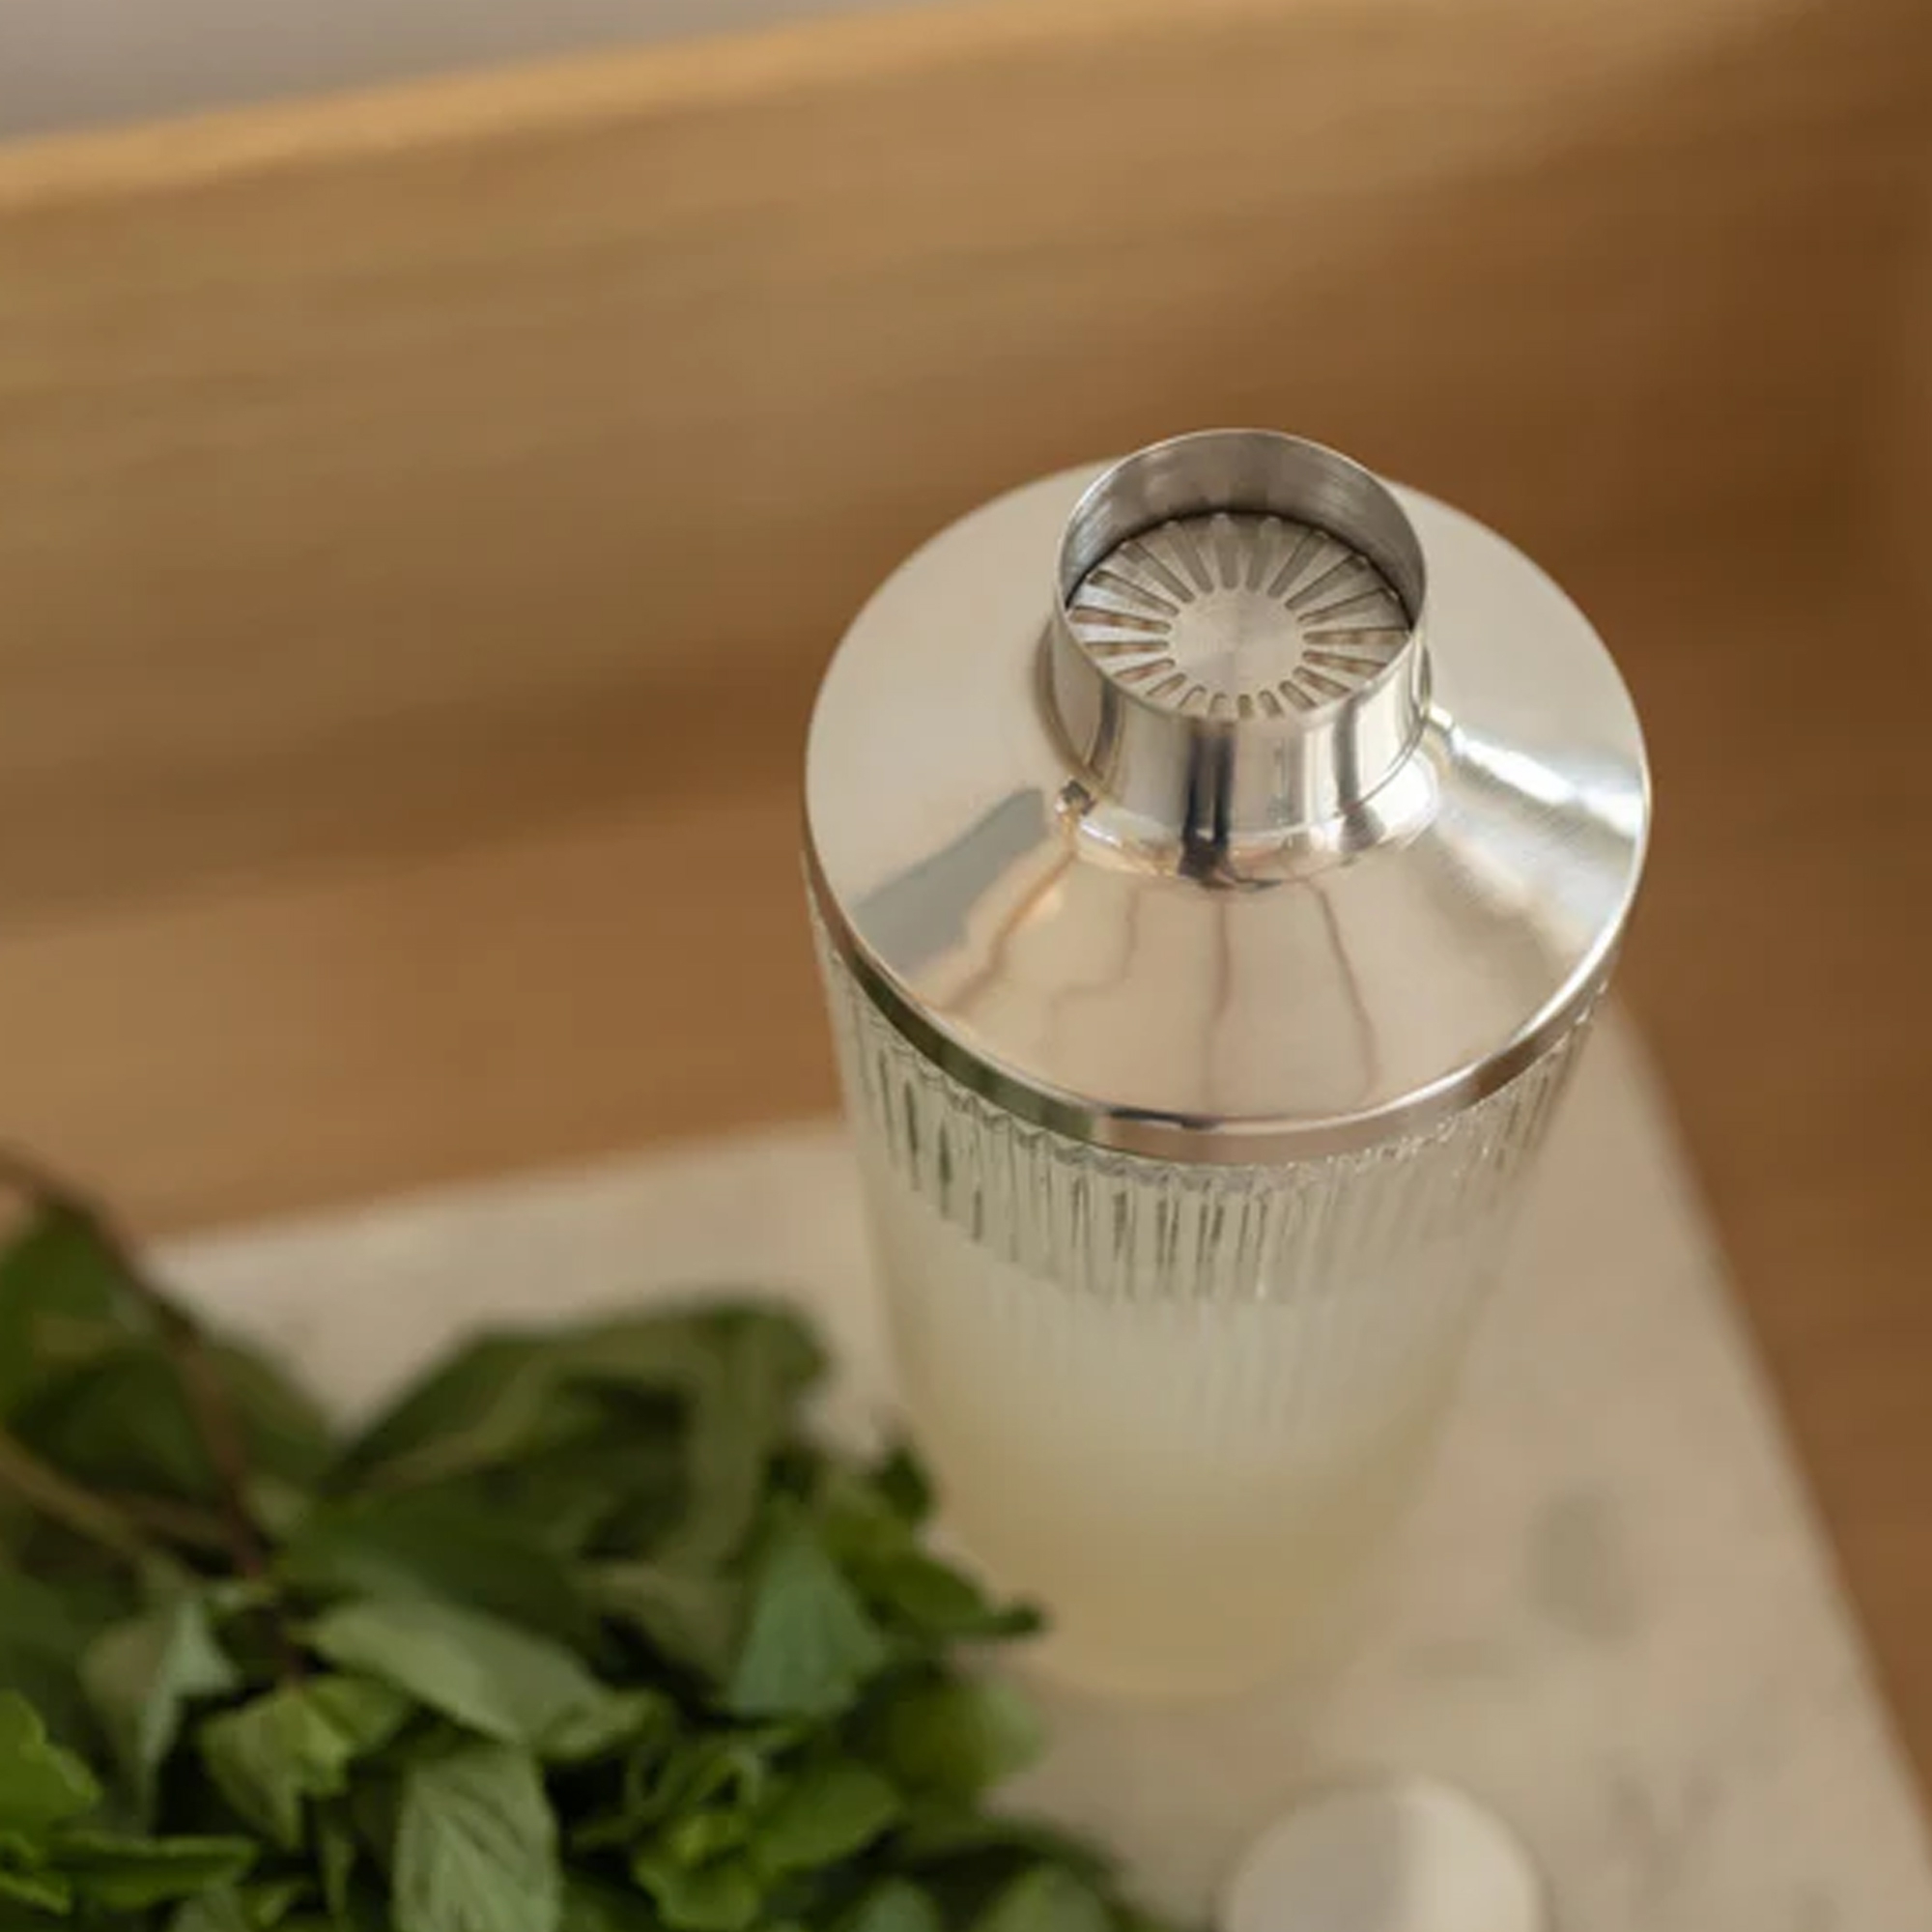 stelton -  Pilastro Cocktail Shaker clear